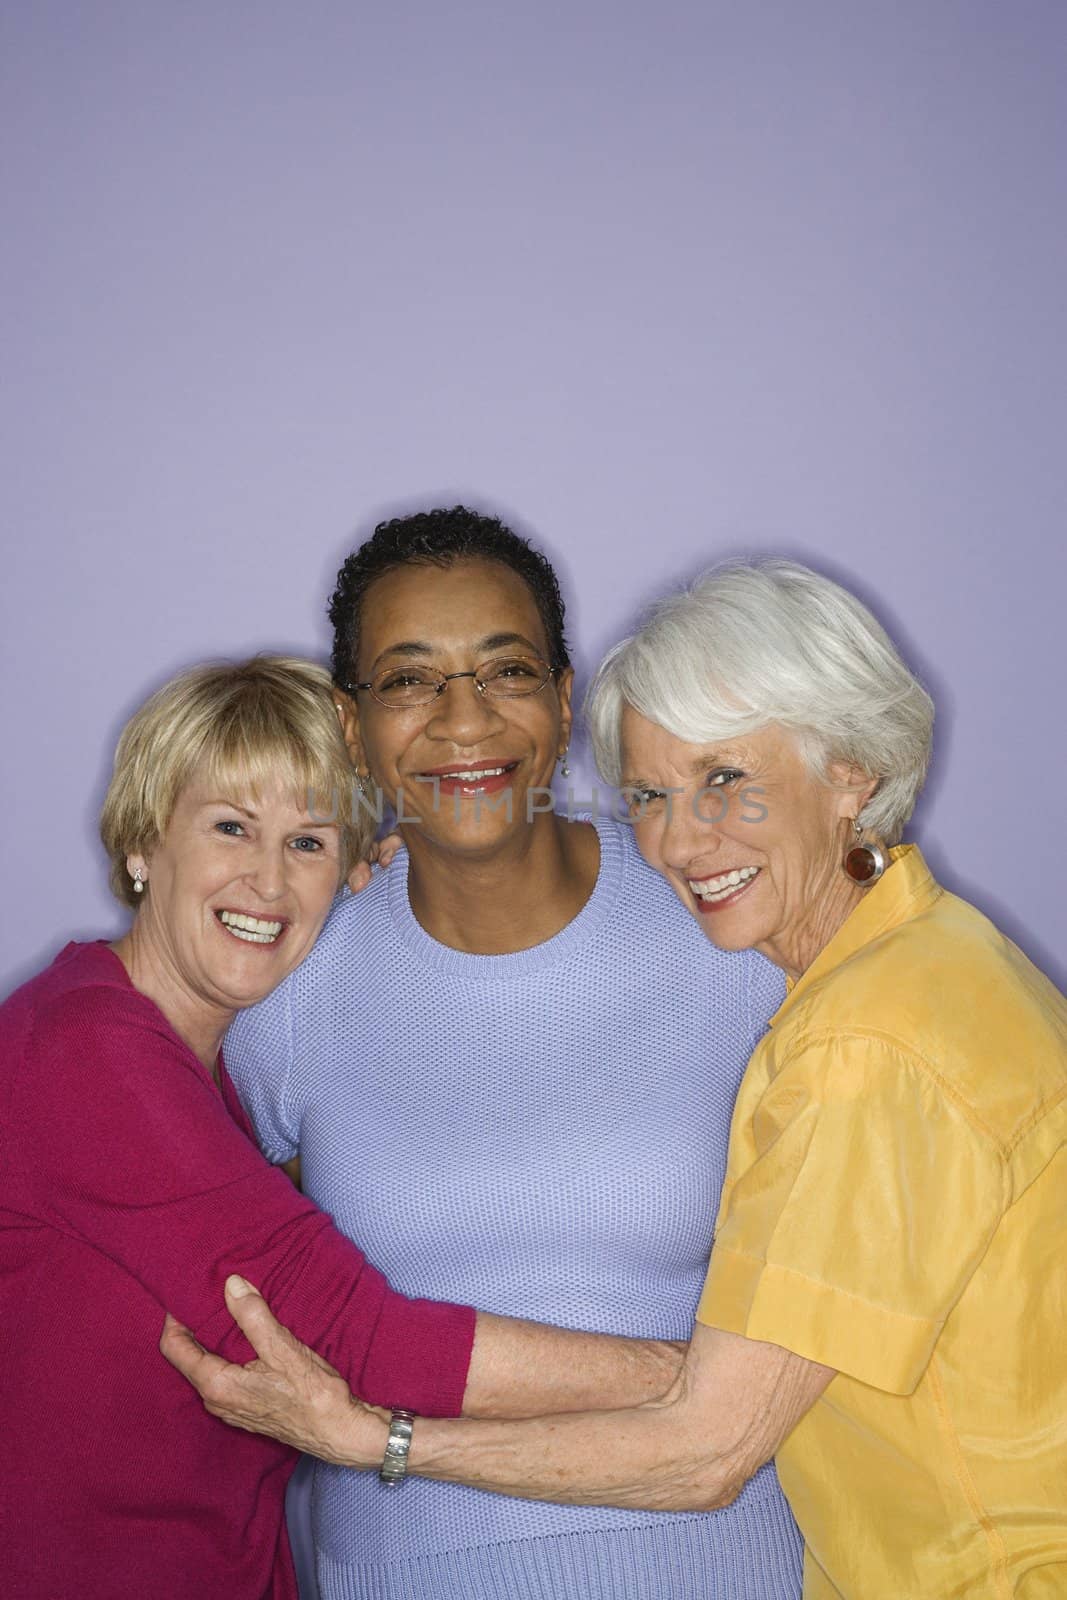 Portrait of Caucasian and African American mature adult females.